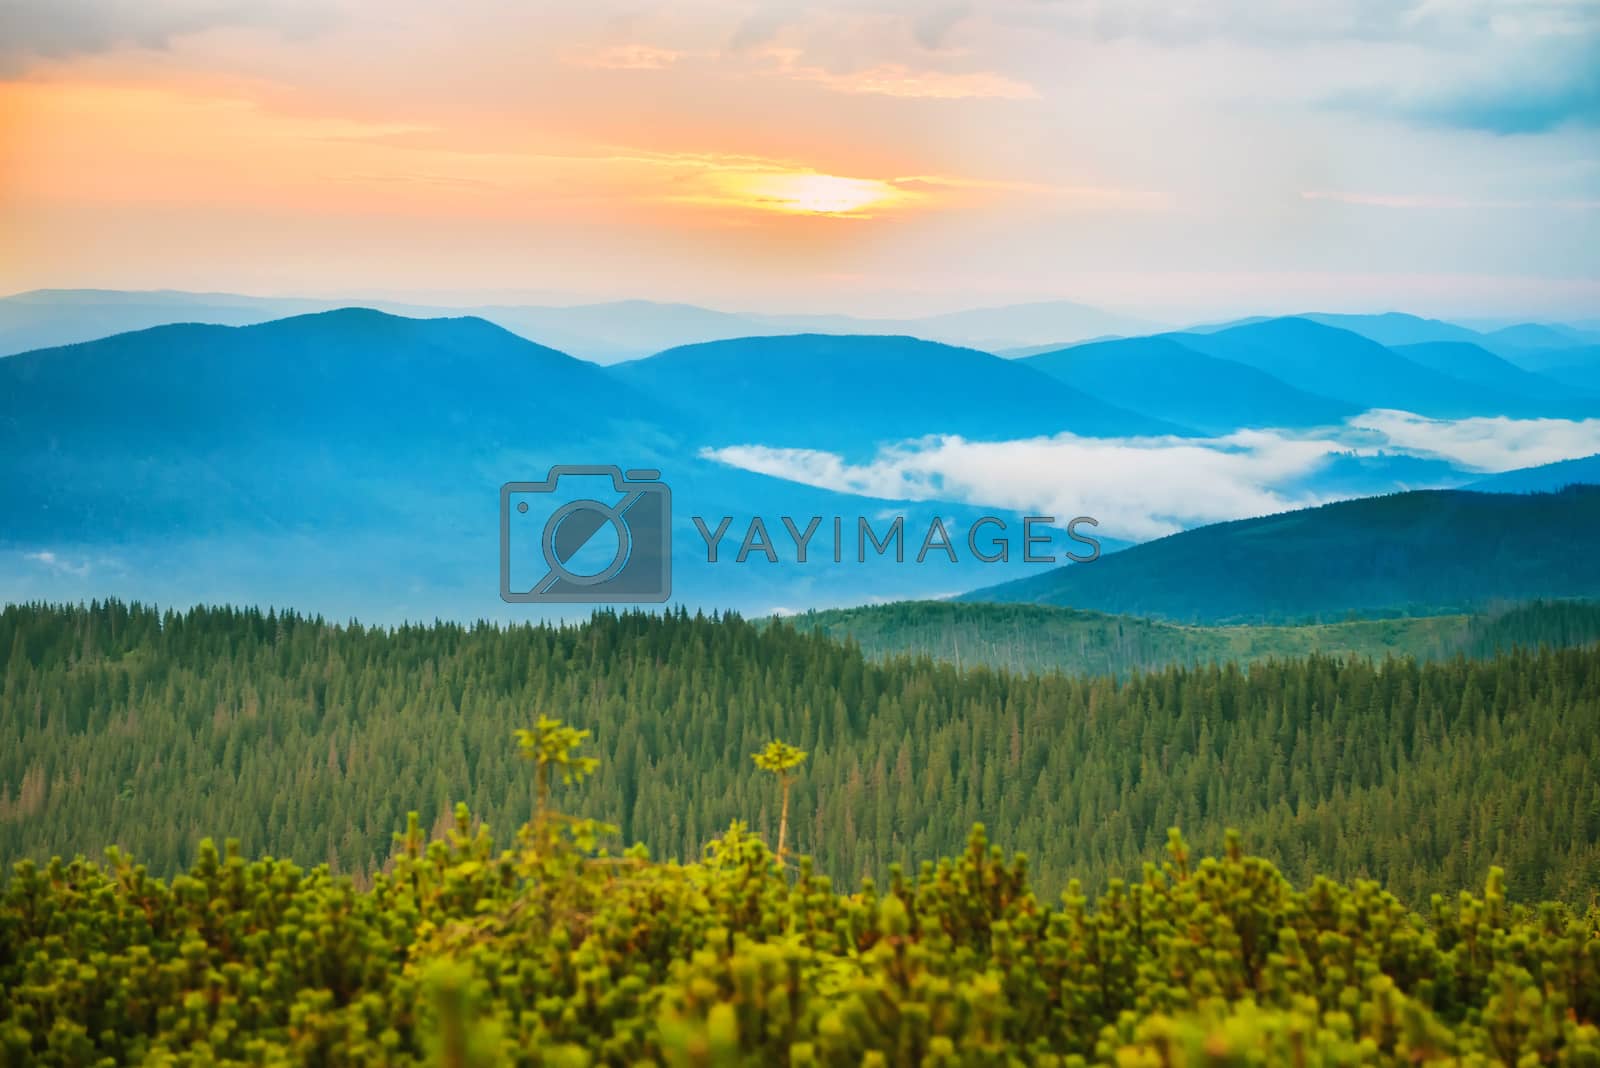 Royalty free image of Sunset in the blue mountains by vapi